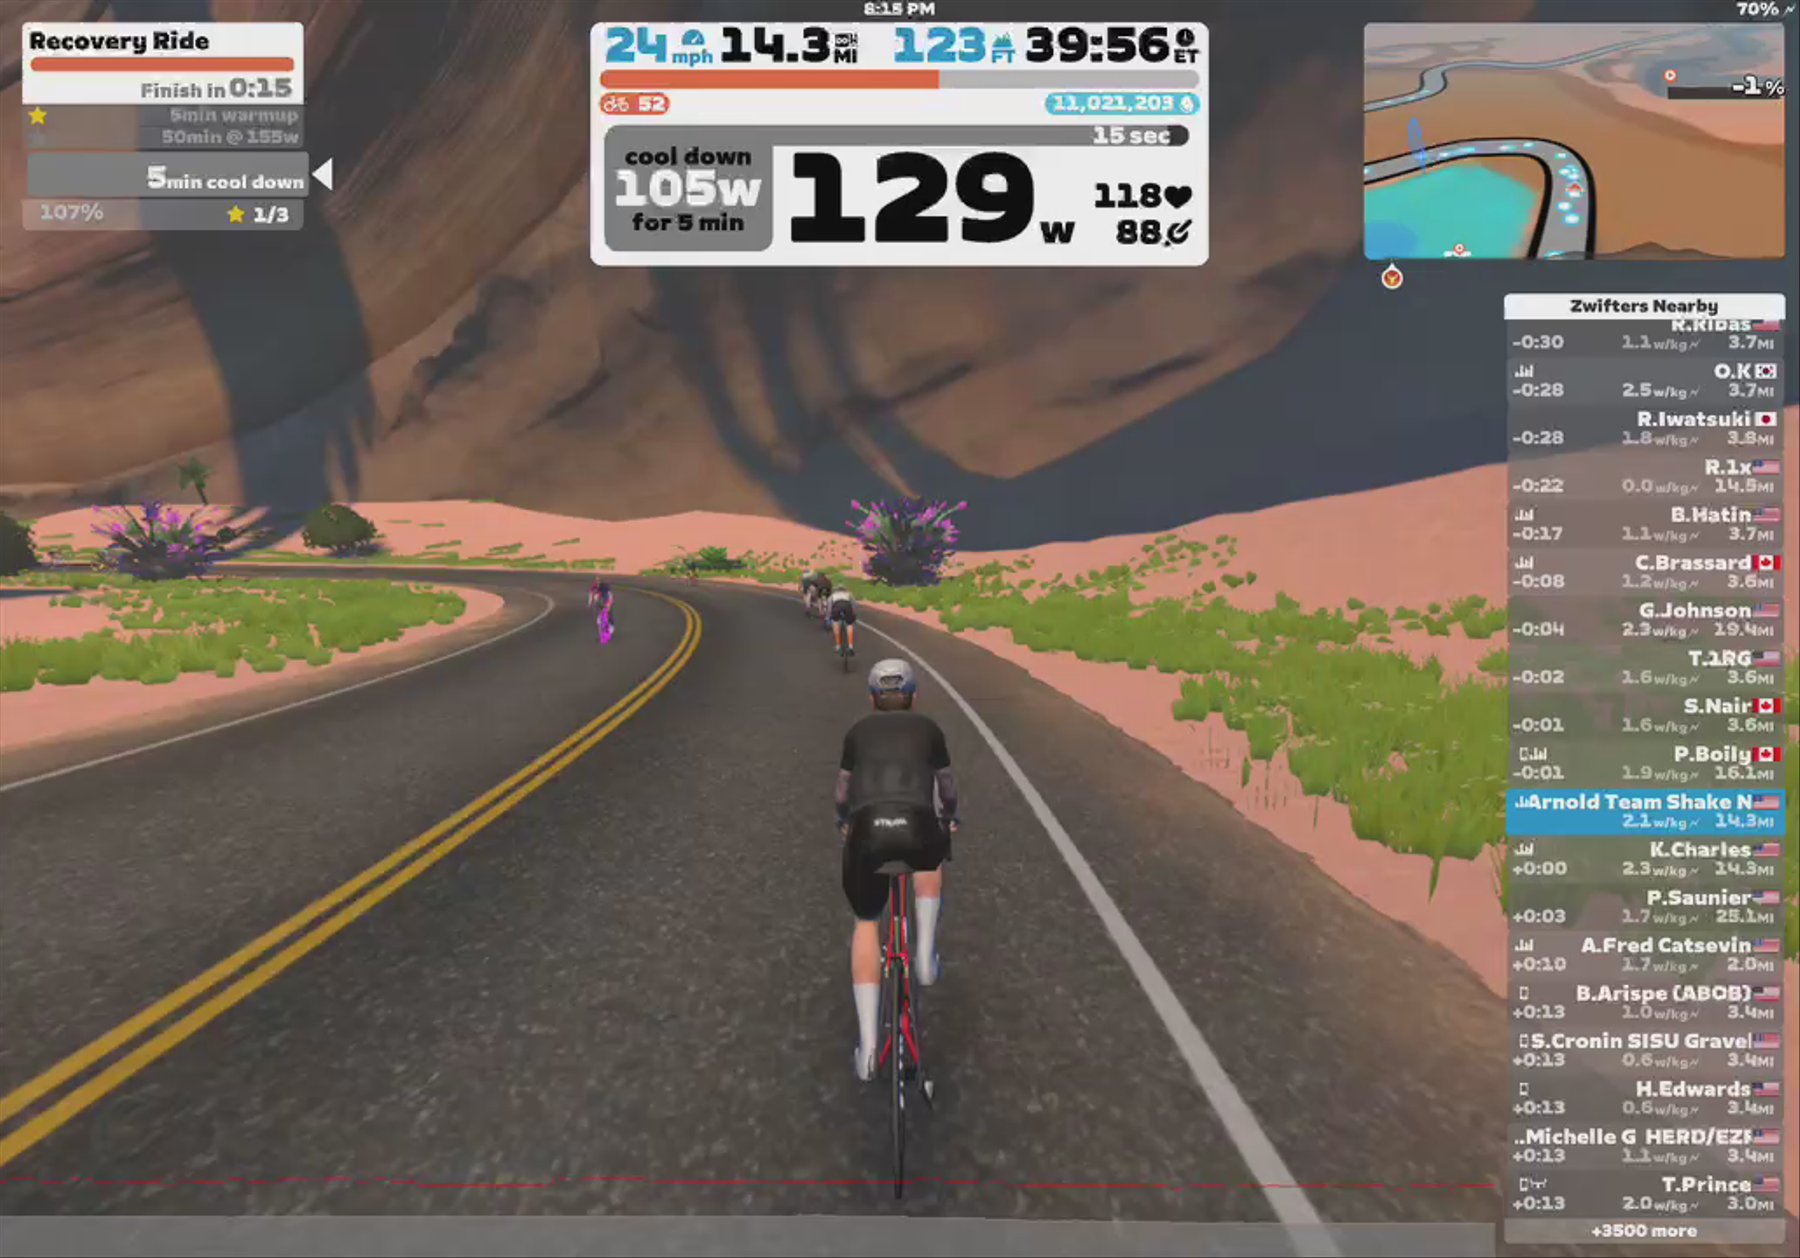 Zwift - Recovery Ride in Watopia